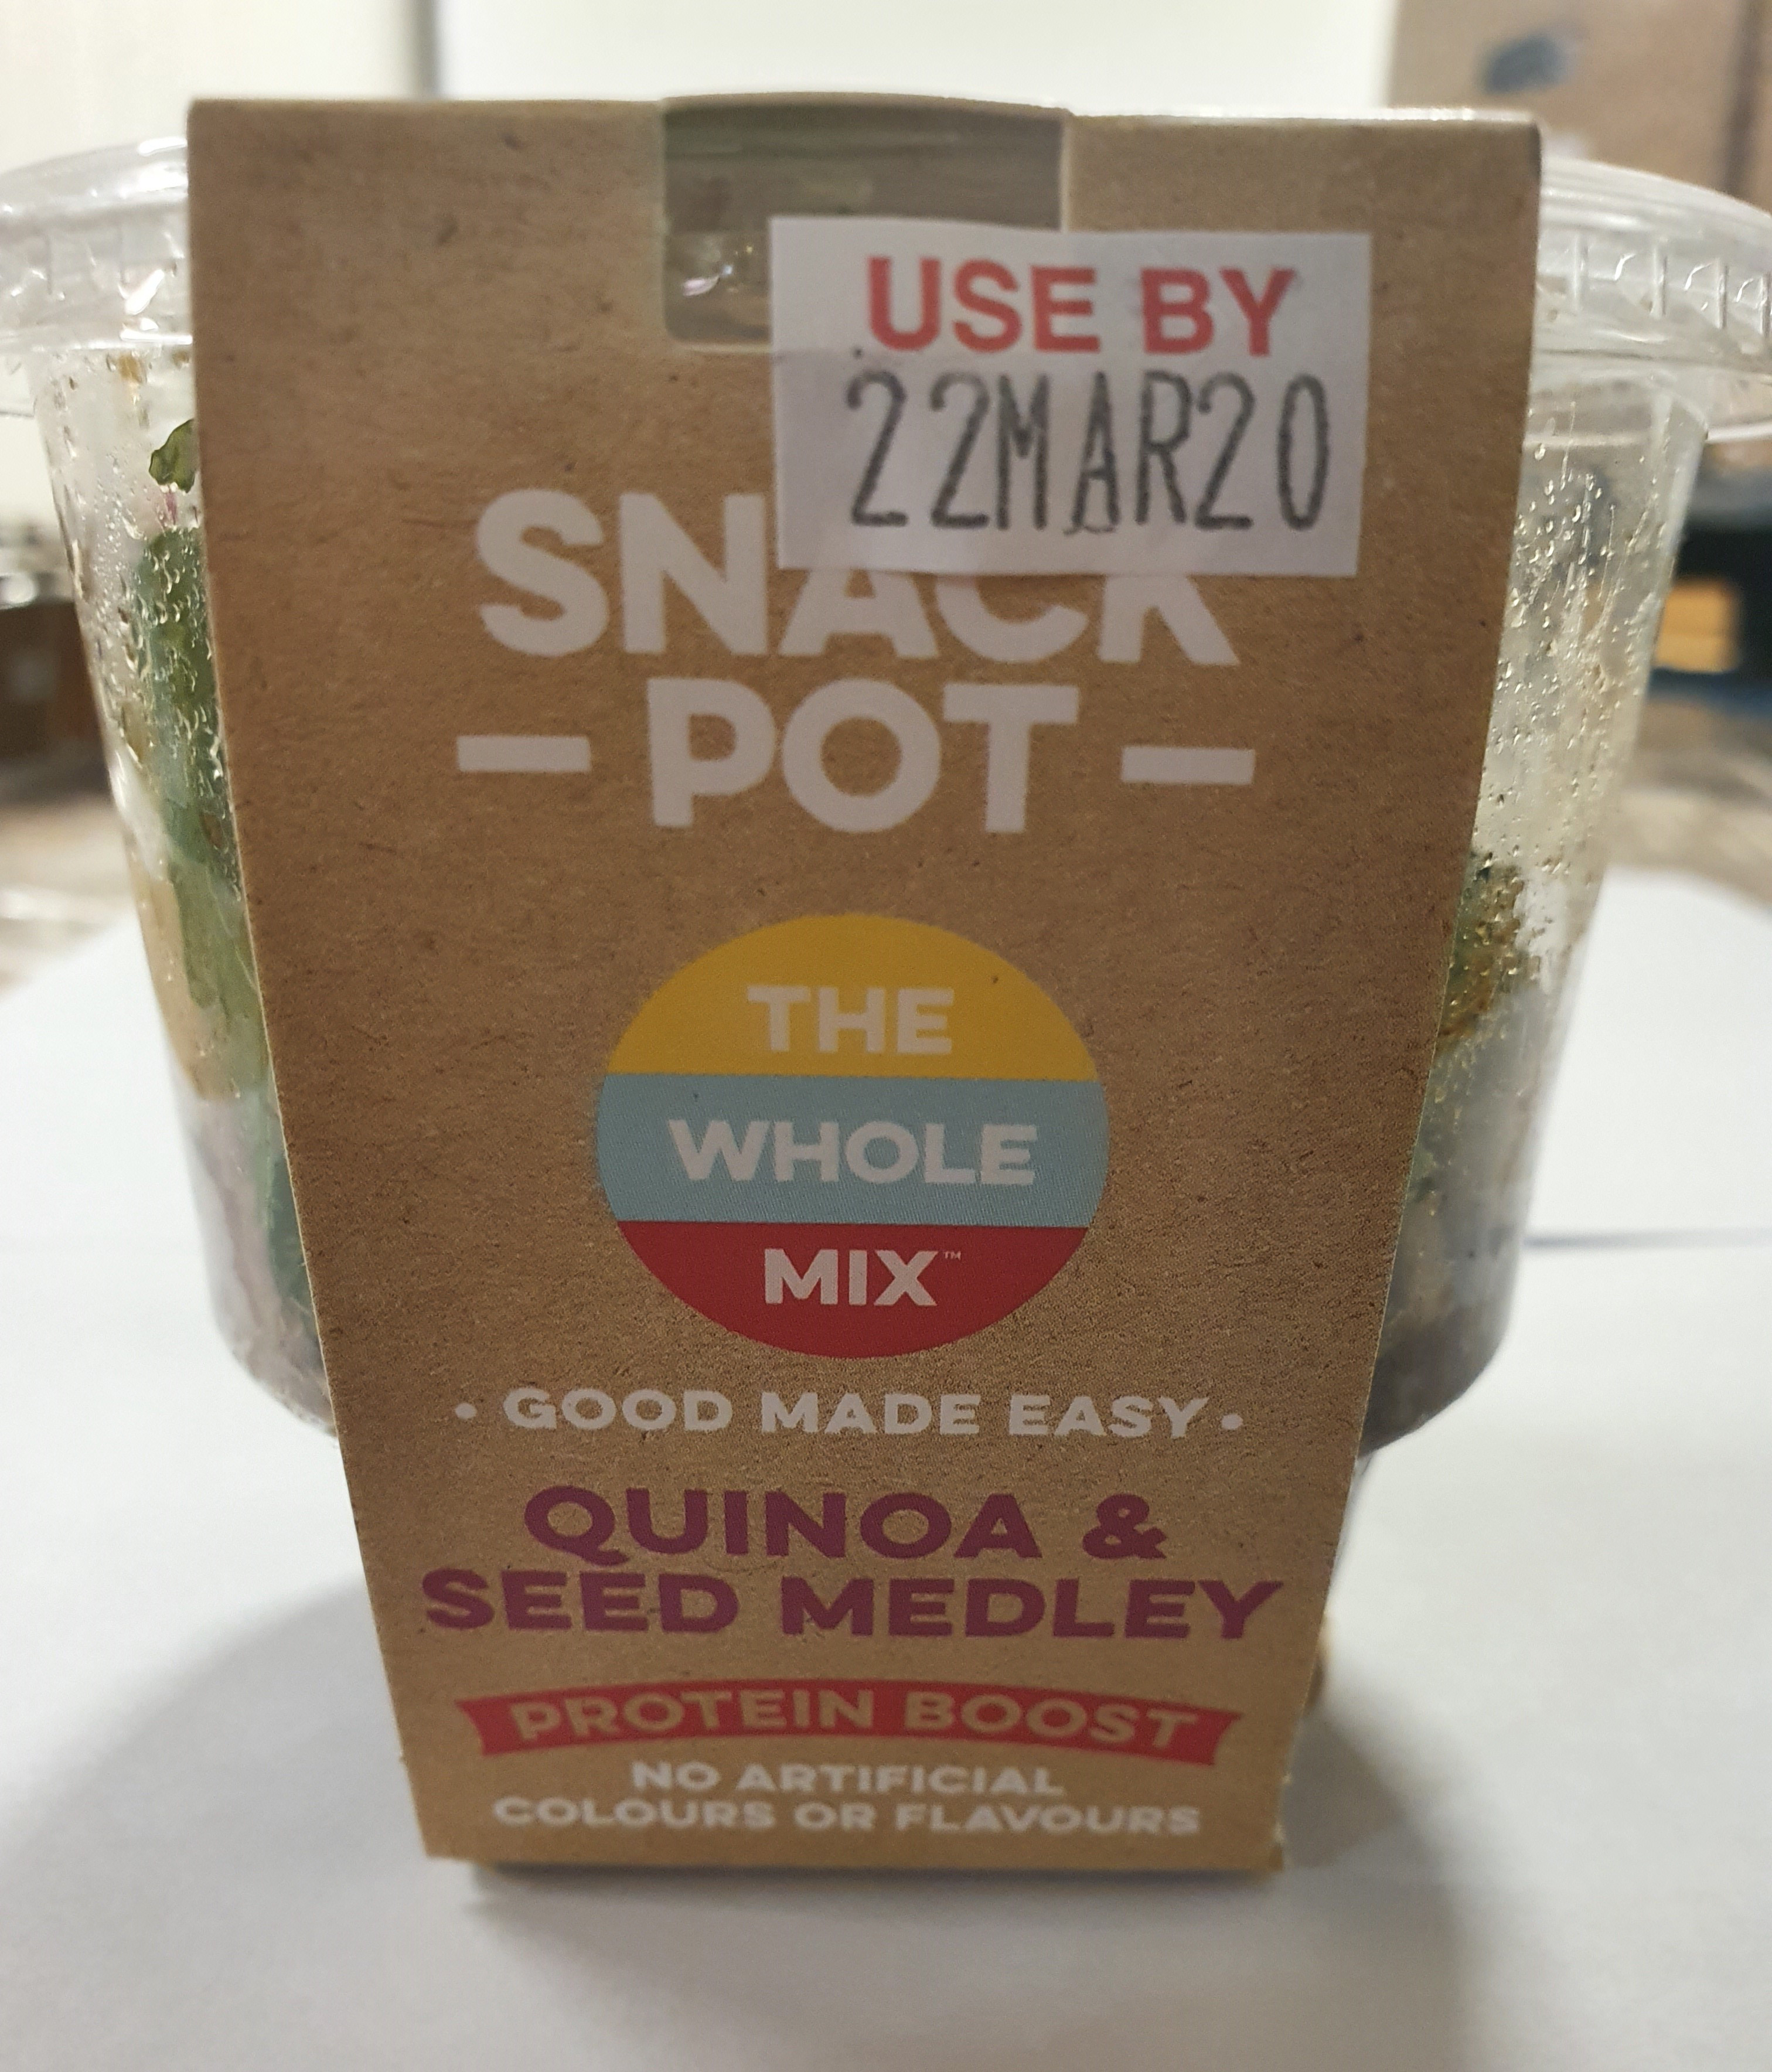 Pottle of the Whole Mix brand Snack Pot Quinoa and Seed Medley 160g